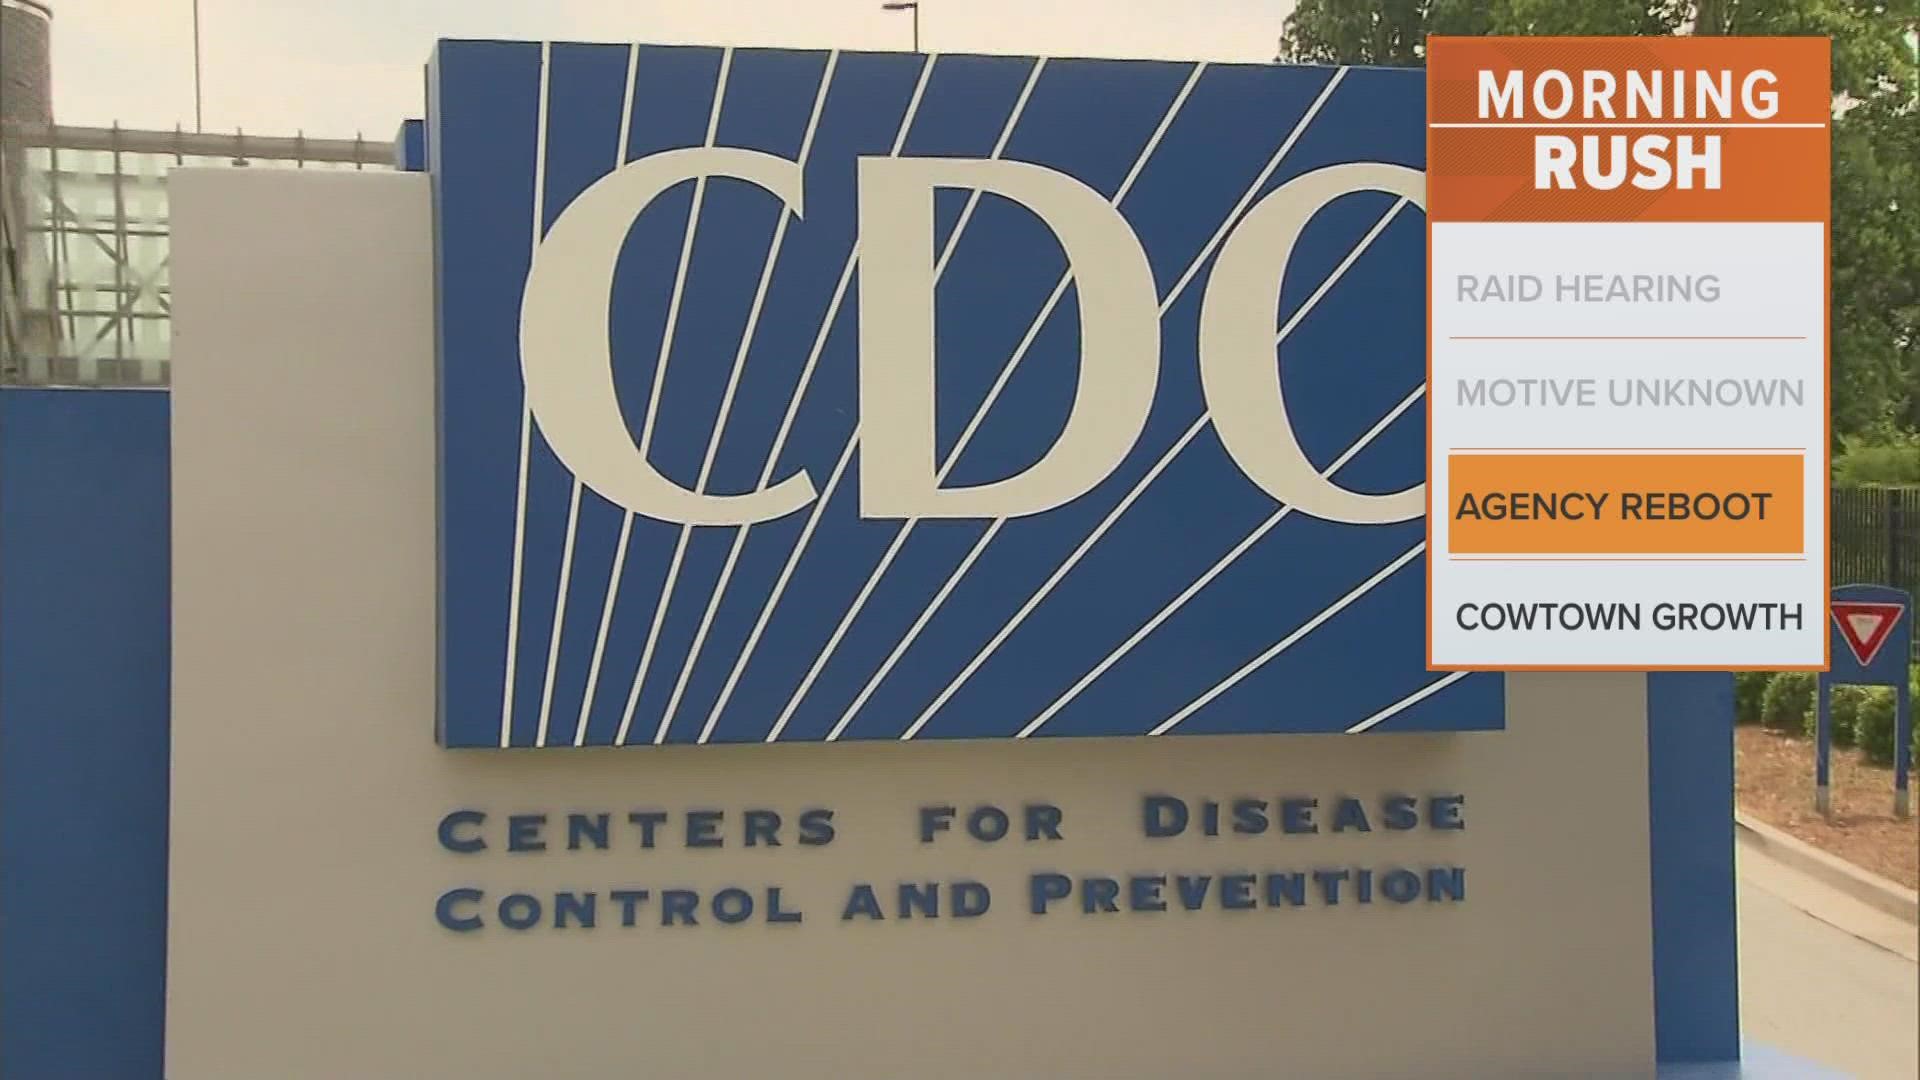 Changes are coming to the CDC after officials say they mishandled aspects of the COVID-19 pandemic.